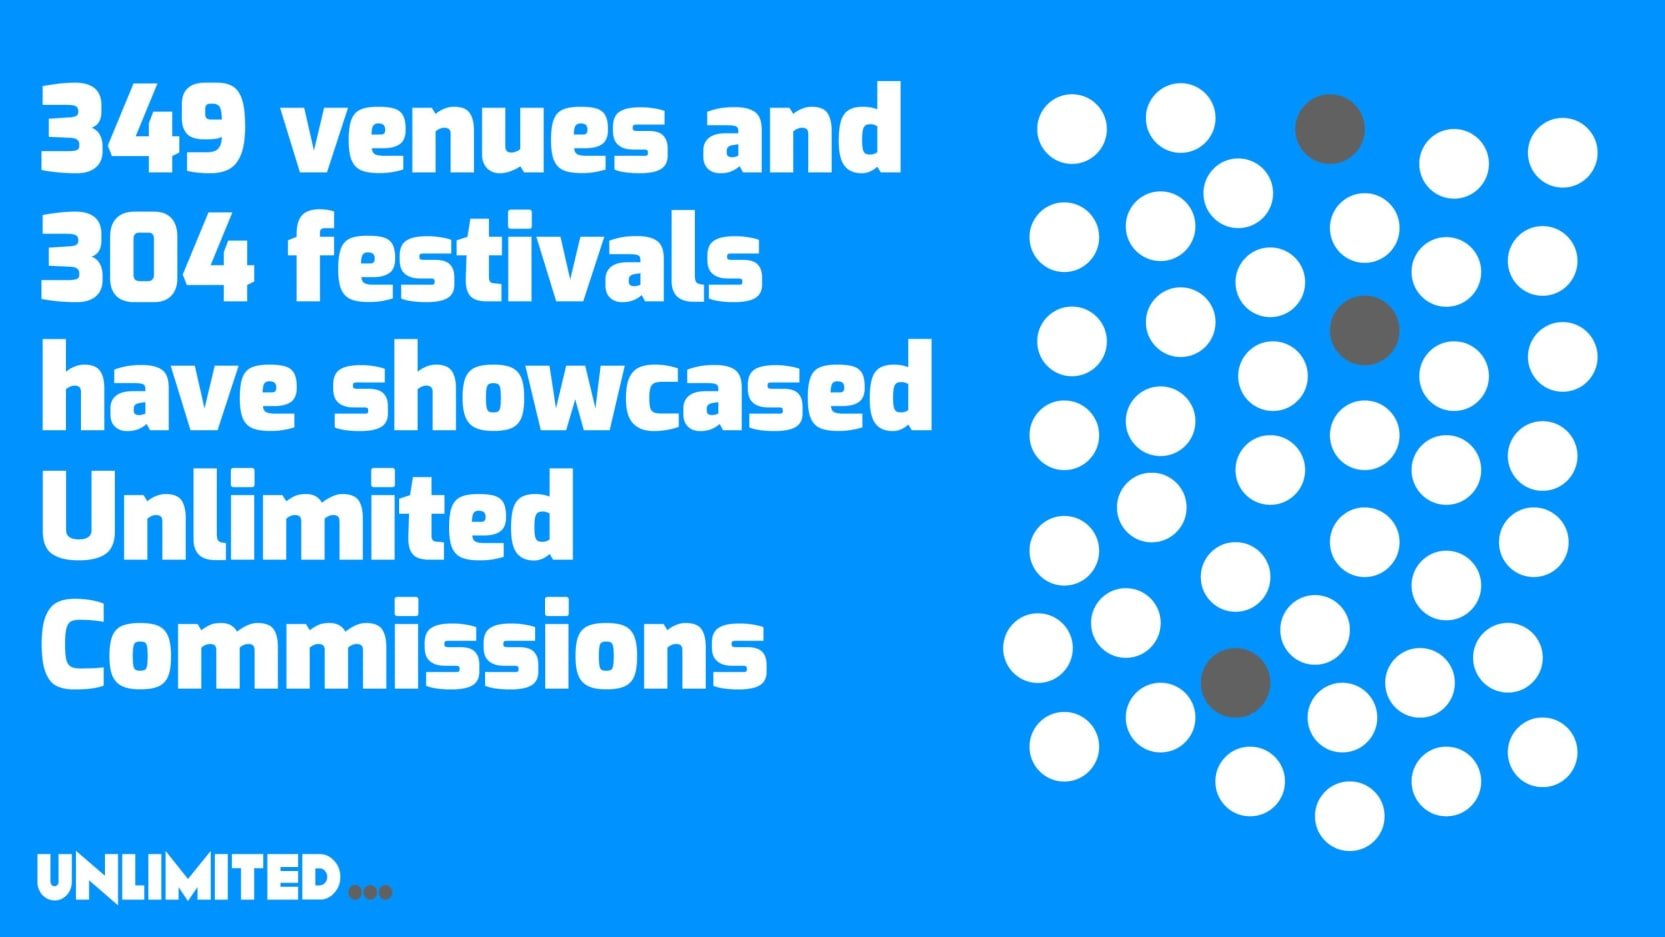 Blue infographic stating that 349 venues and 304 festivals have showcased Unlimited commissions